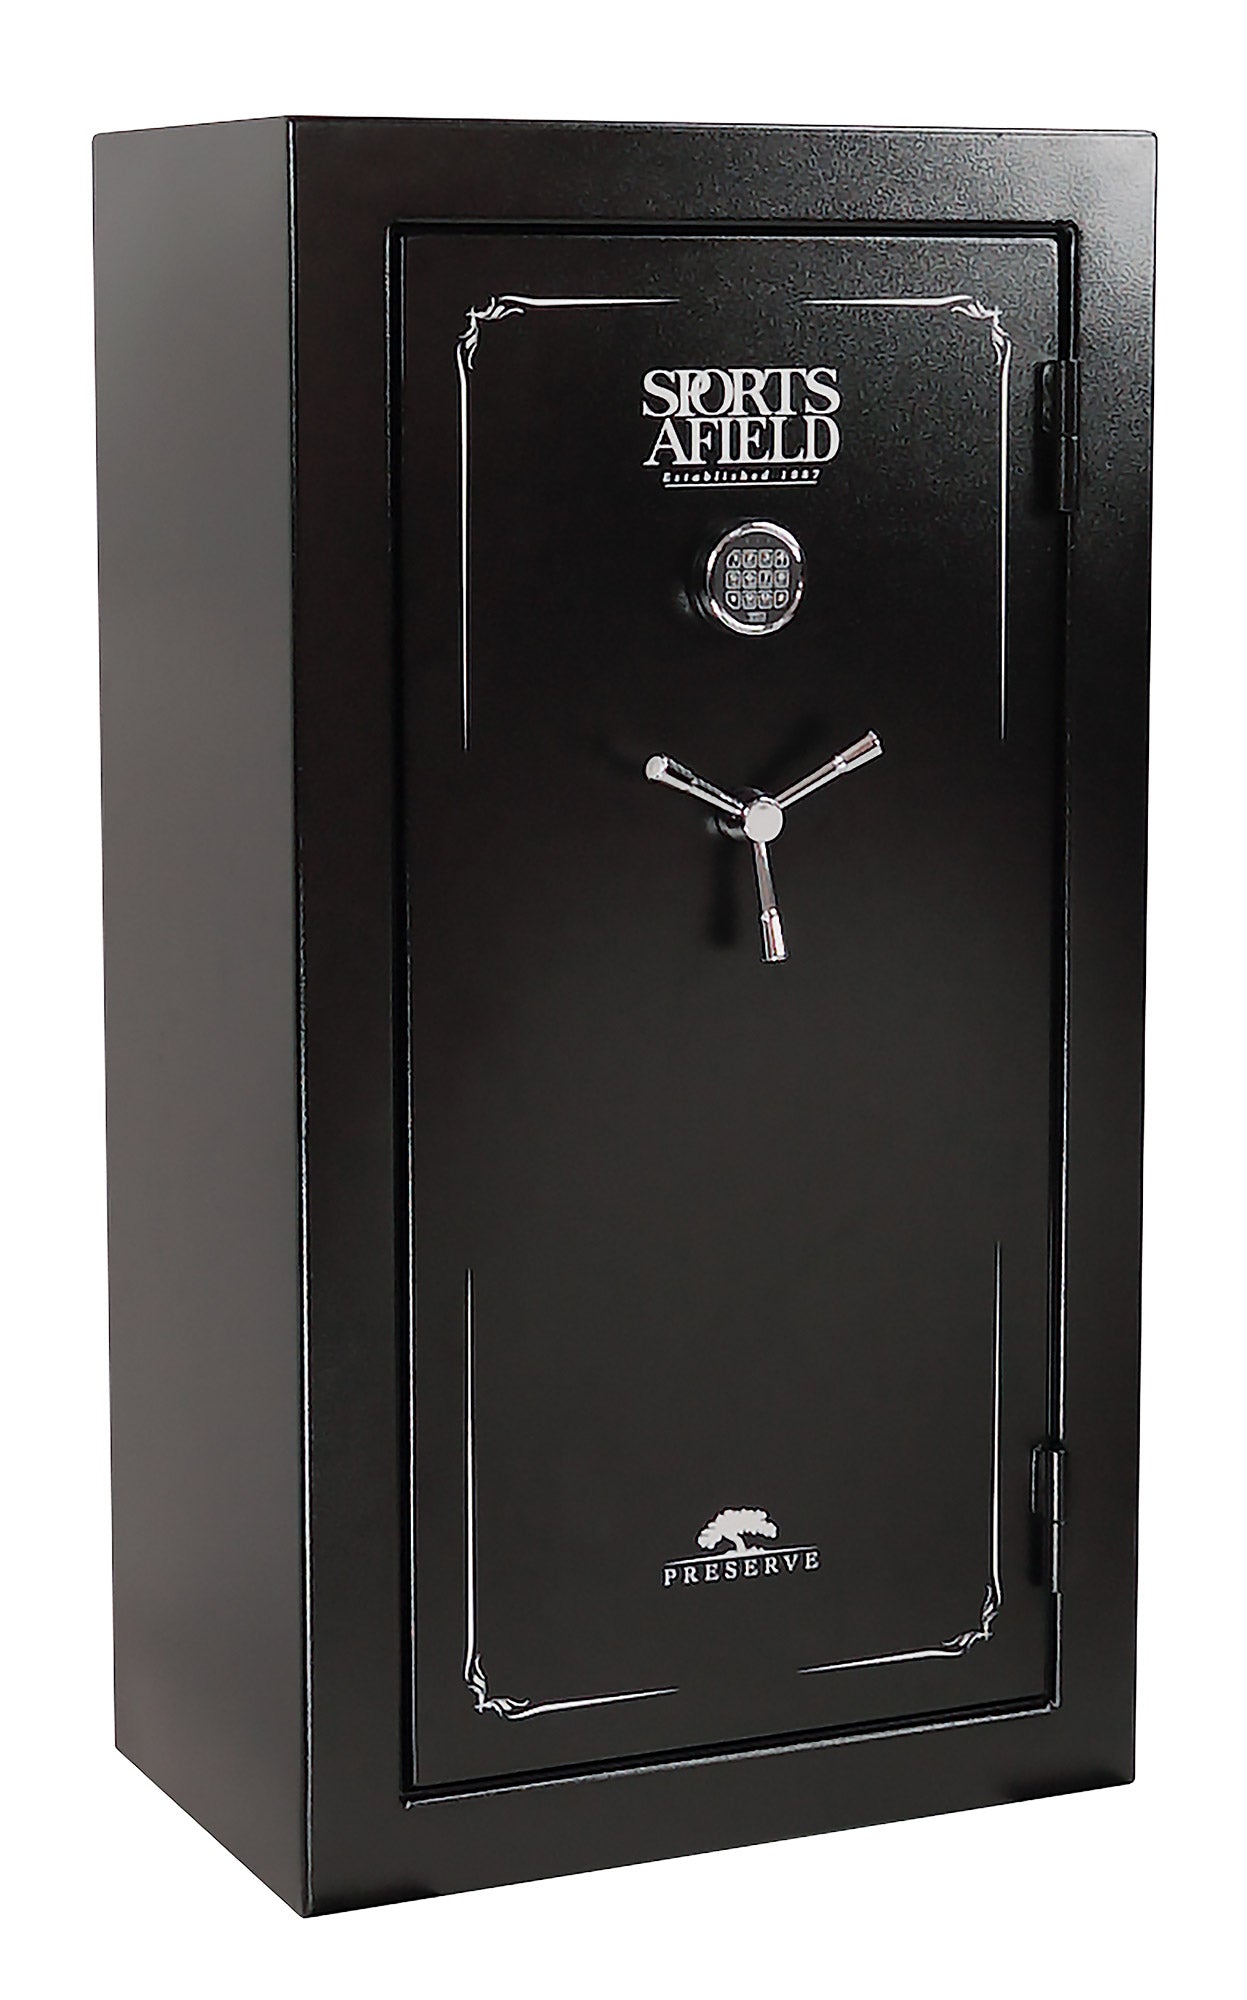 Sports Afield SA5932P PRESERVE SERIES – FIRE-RATED 32 GUN SAFE